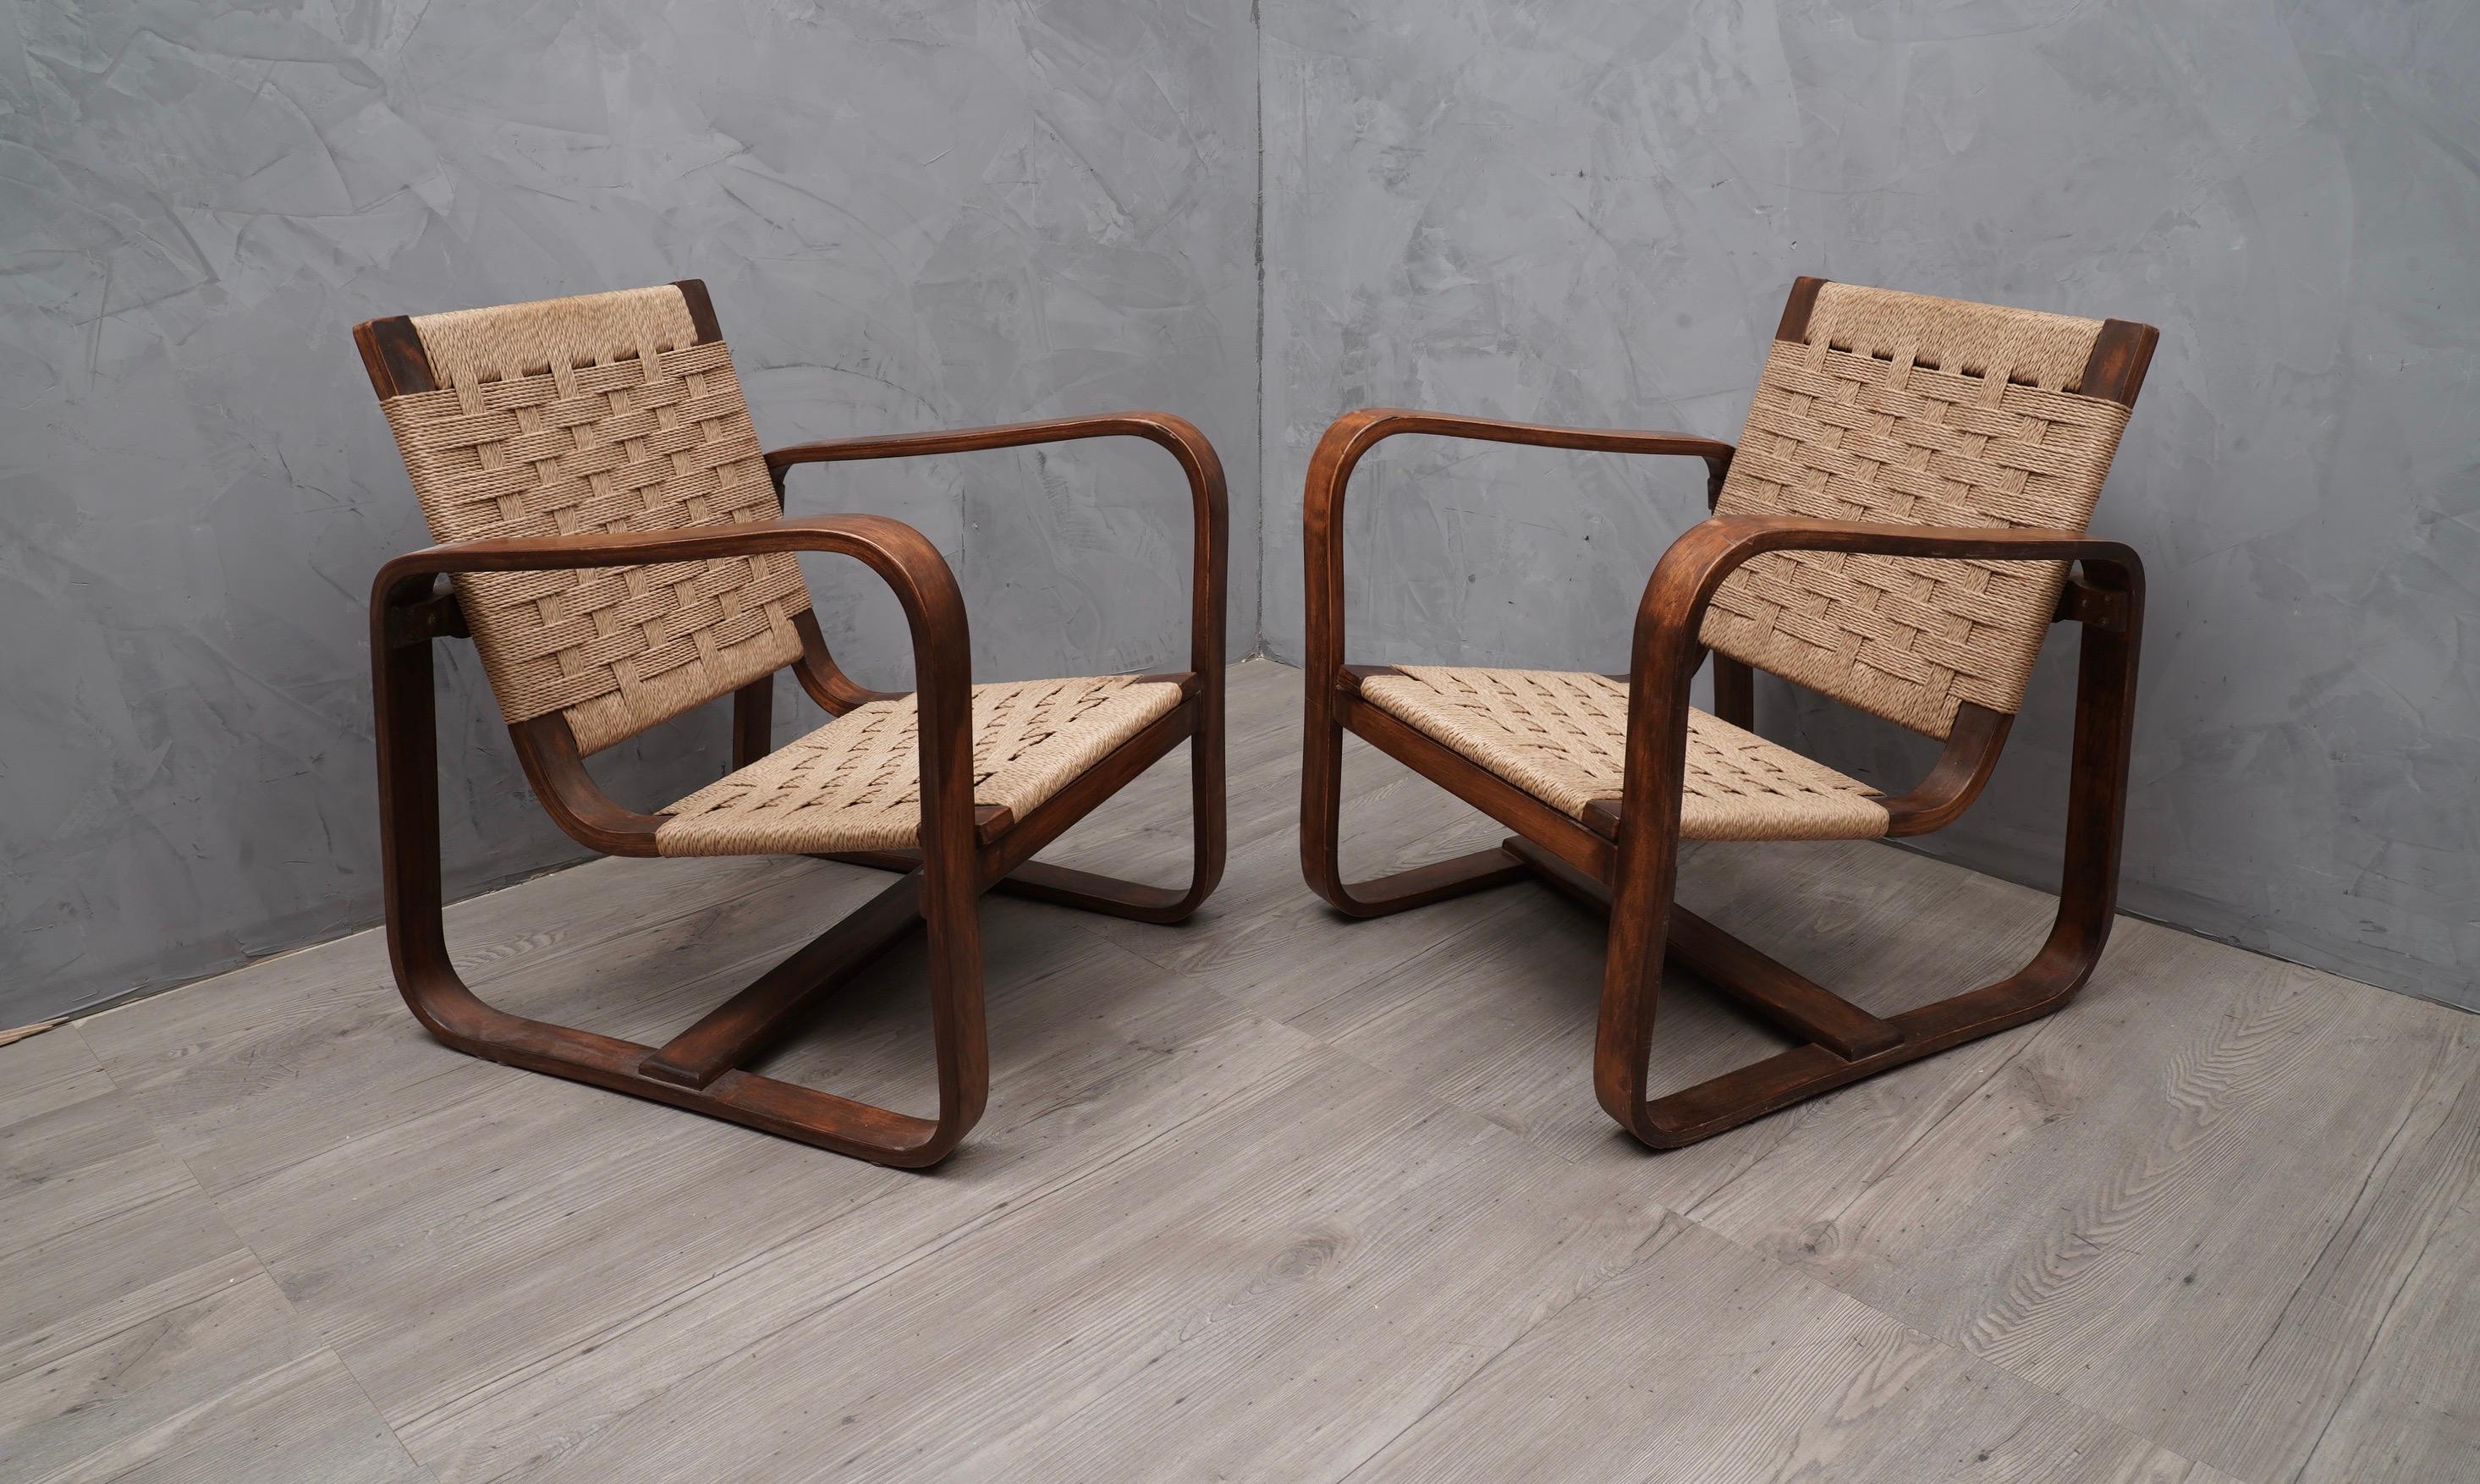 A very rare and essential pair of armchairs in 1940. 

Giuseppe Pagano Pogatschnig e Gino Maggioni designed this Fine armchairs in curved wood. It is formed by two large square in curved wood, (typical processing of that historical period), that act